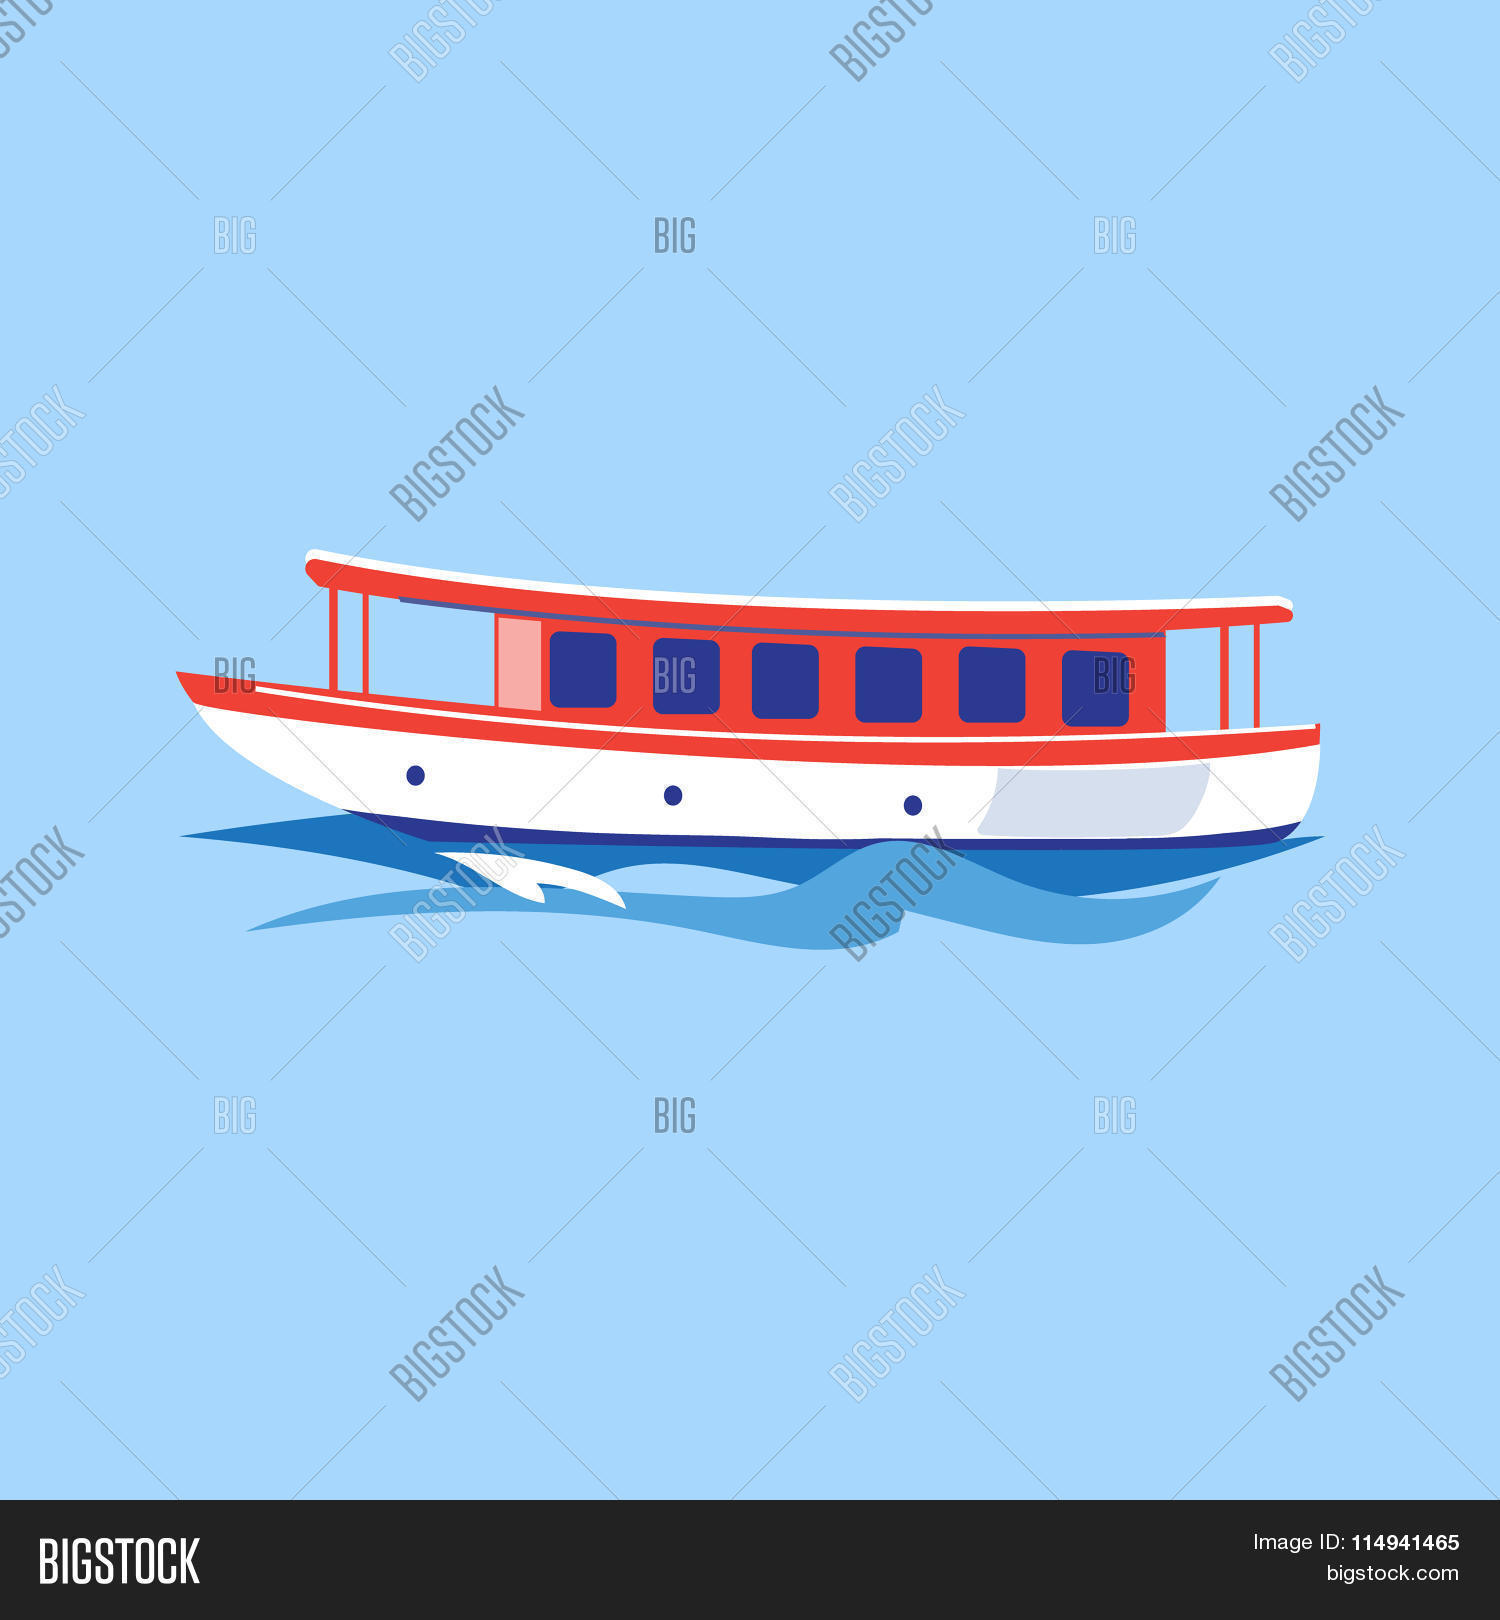 Excursion Ship on the Water. Vector Illustration Stock Vector.